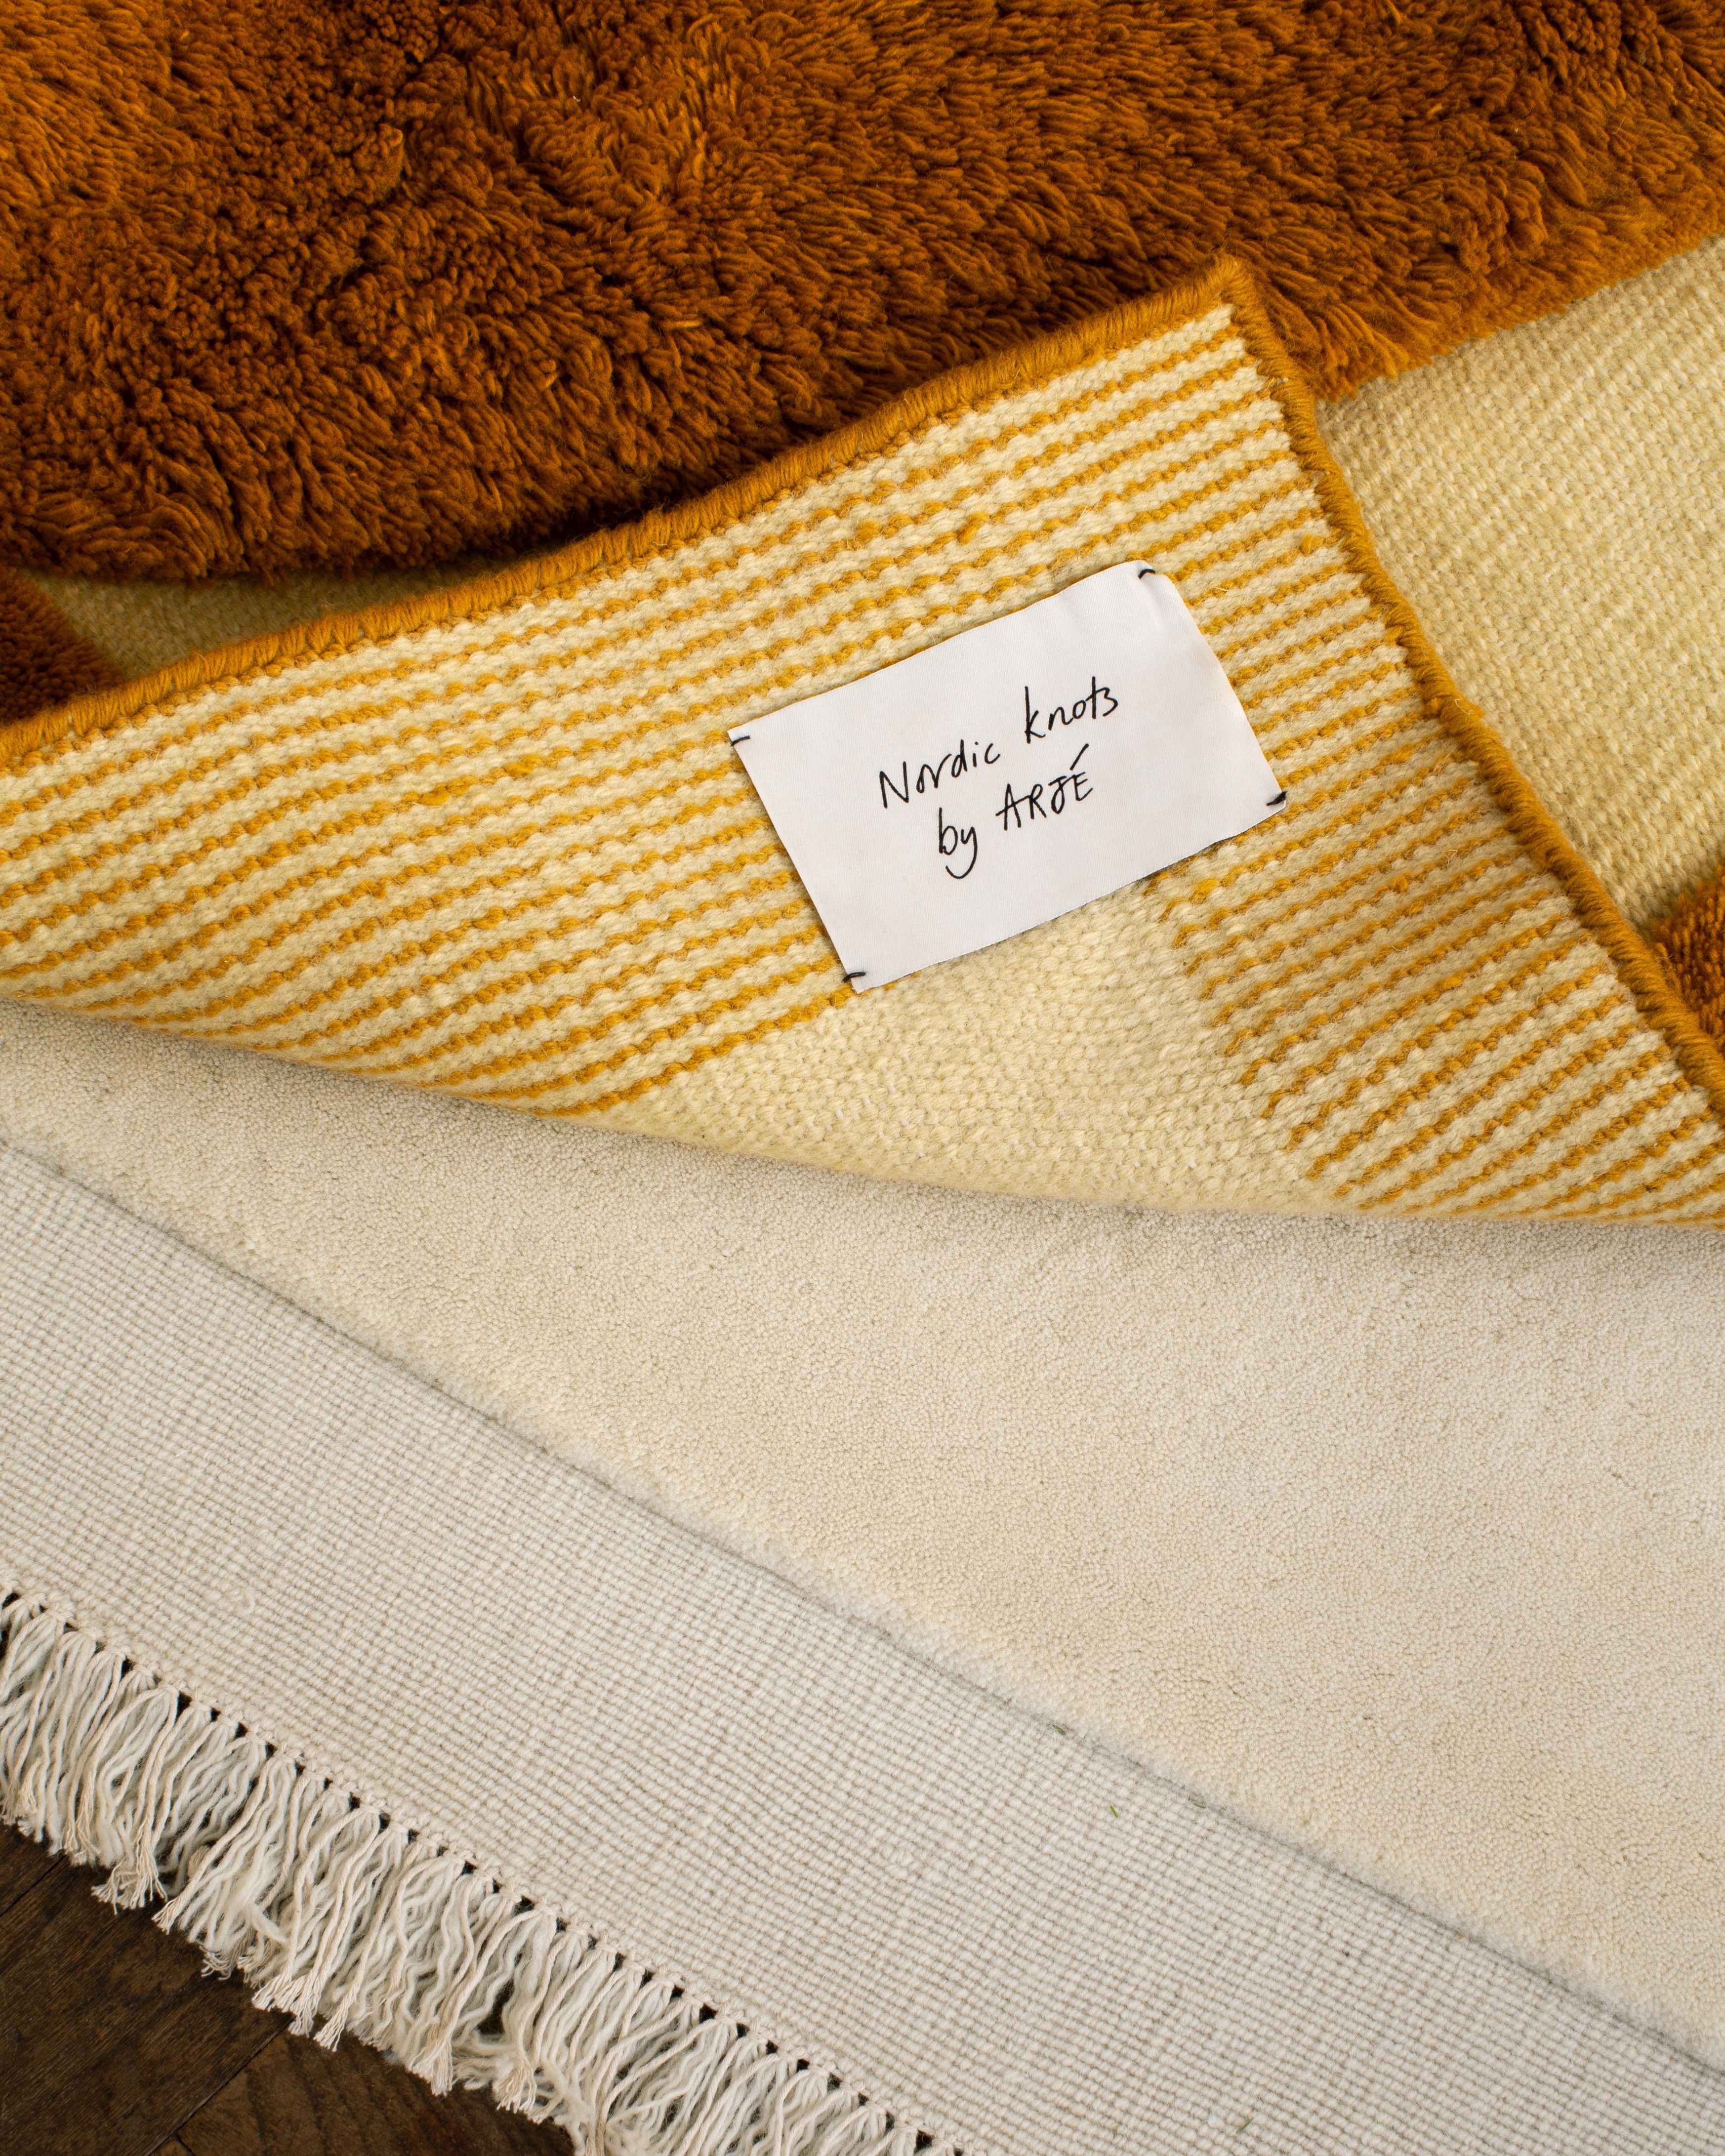 a label on a brown and white blanket